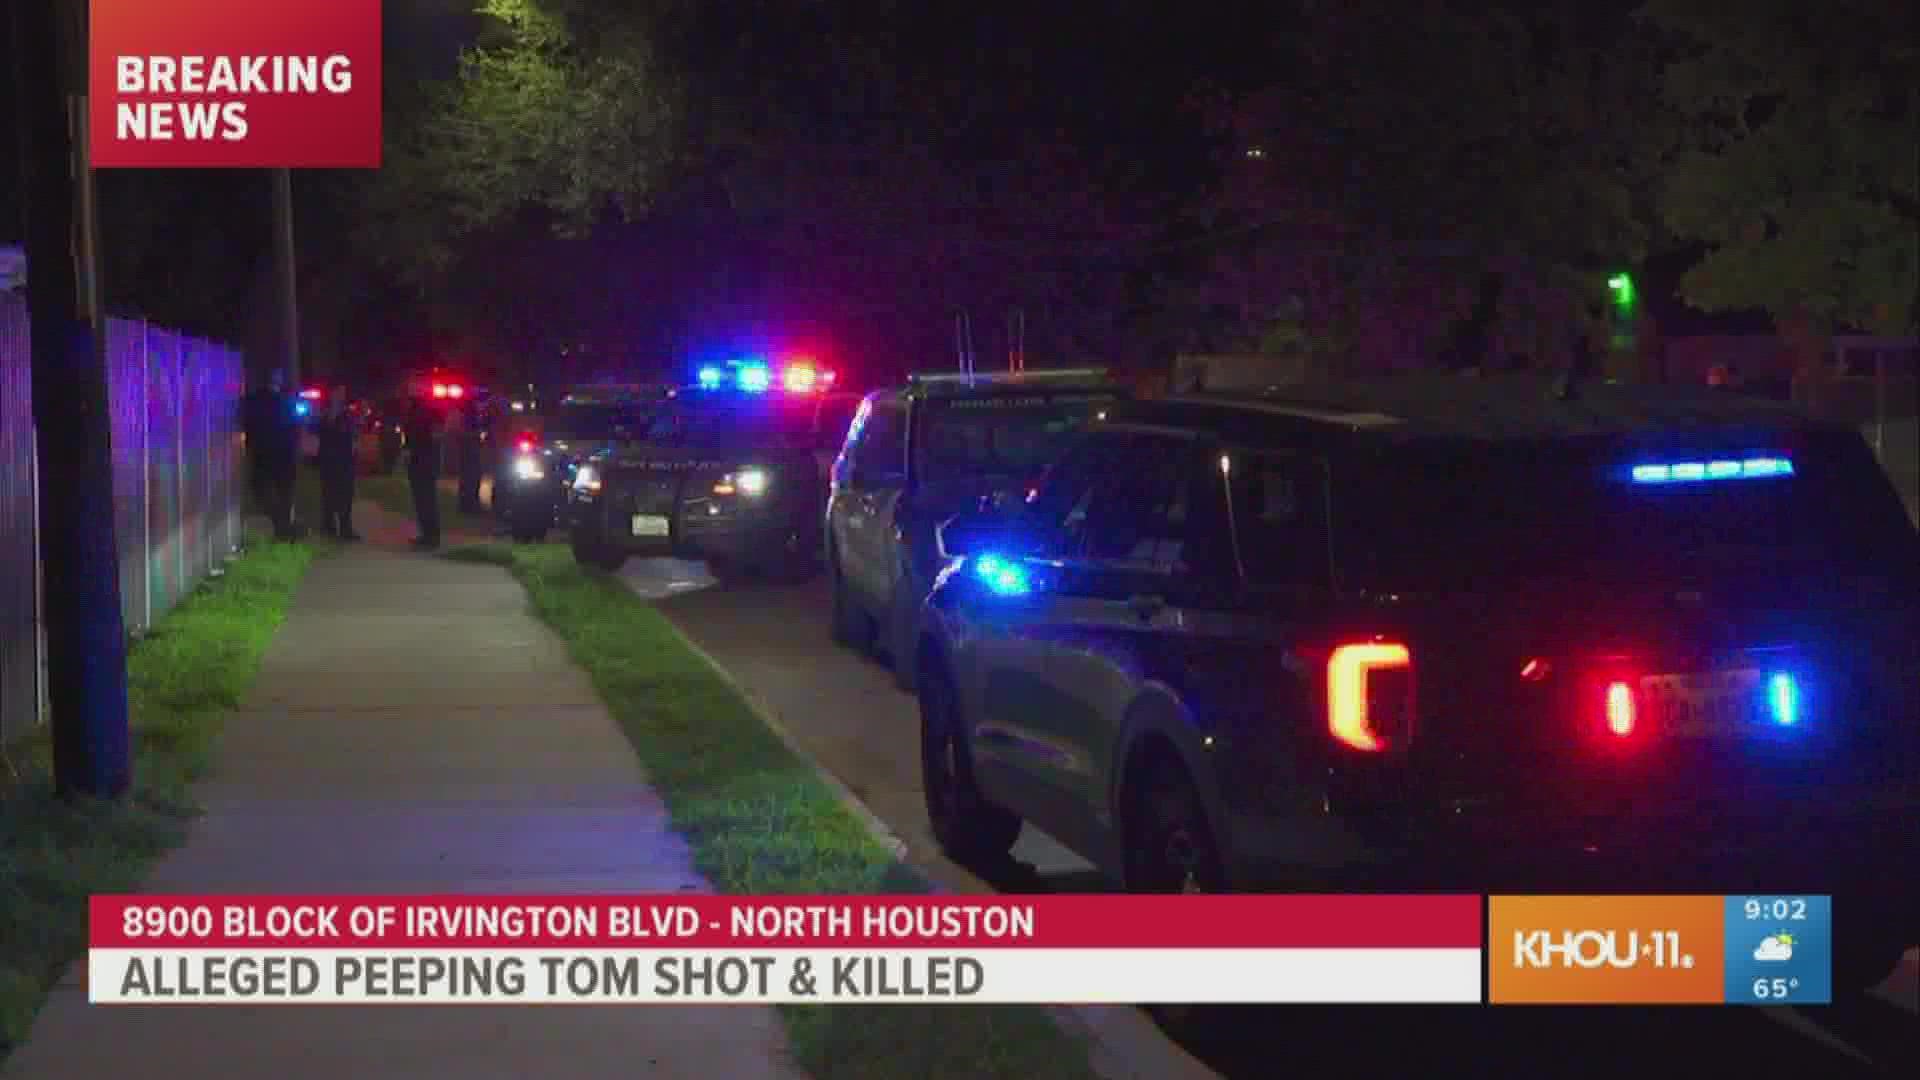 A man accused of being a "peeping Tom" was shot and killed outside a woman's home in north Houston, according to Houston police.